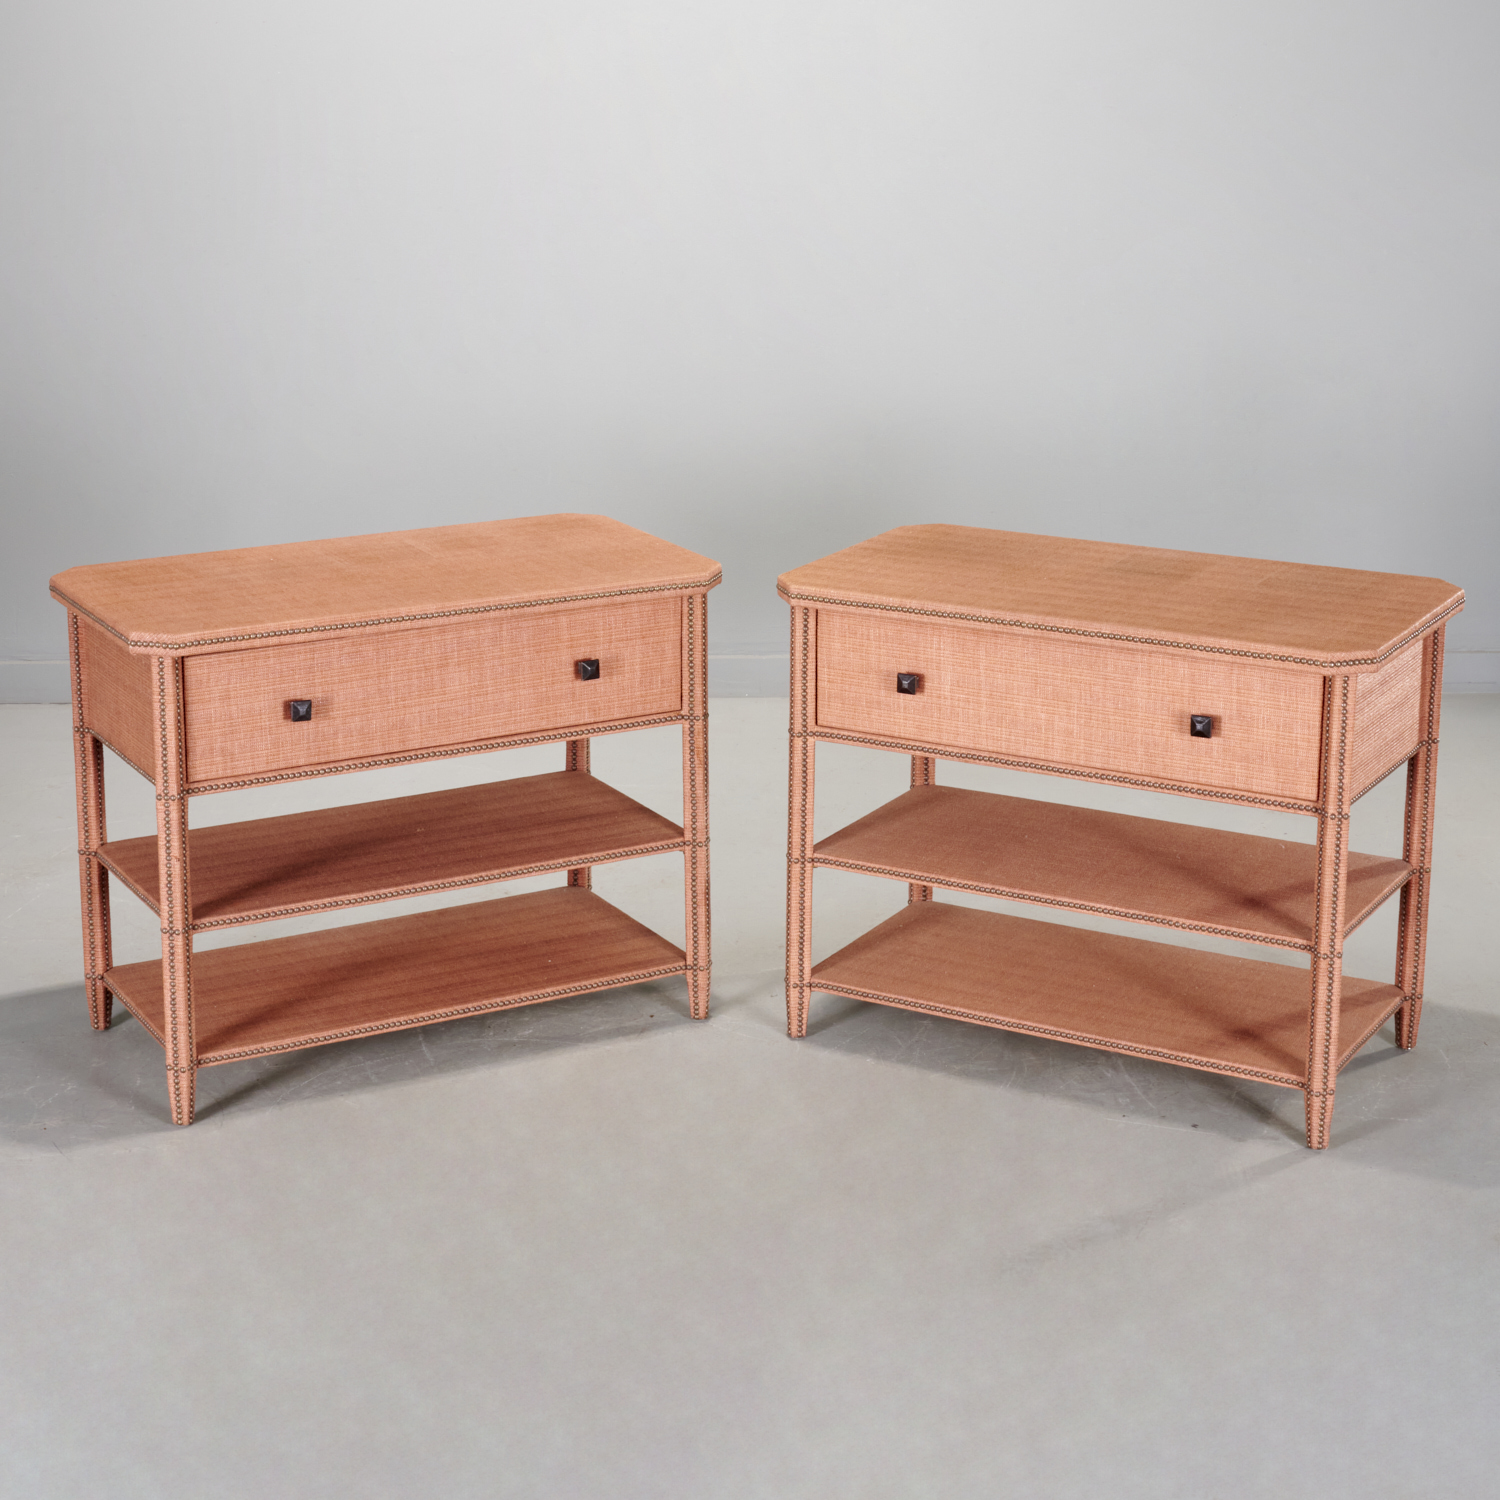 PAIR WOVEN STRAW CLAD BEDSIDE TABLES,